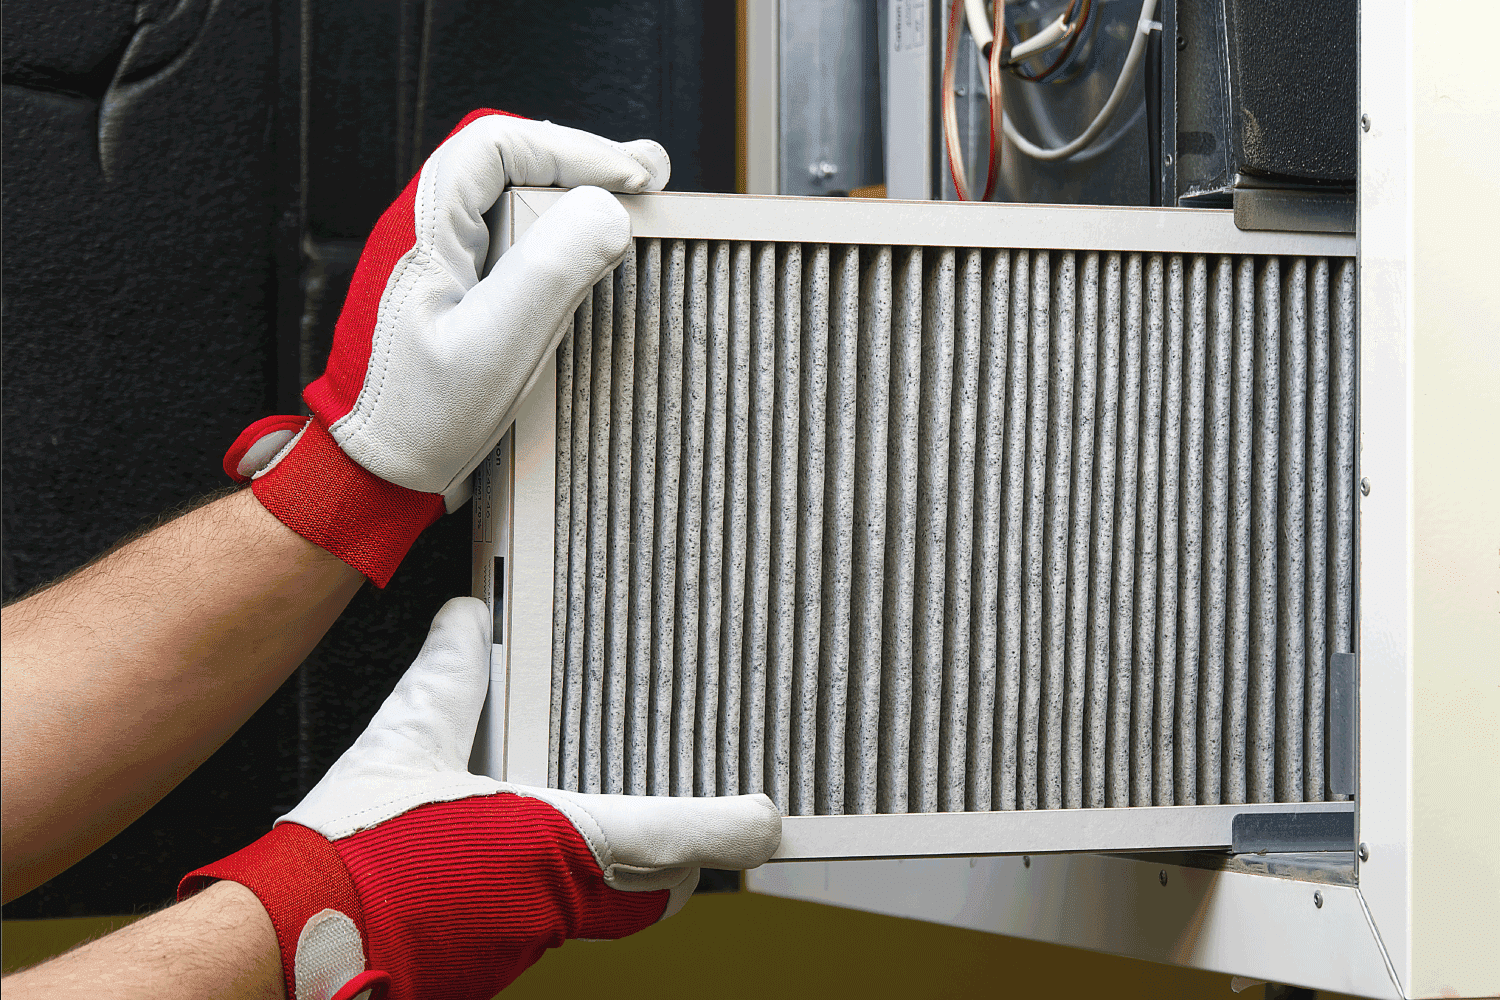 Replacing Dirty Air filter for home central air conditioning system. Change filter in rotary heat exchanger recuperator